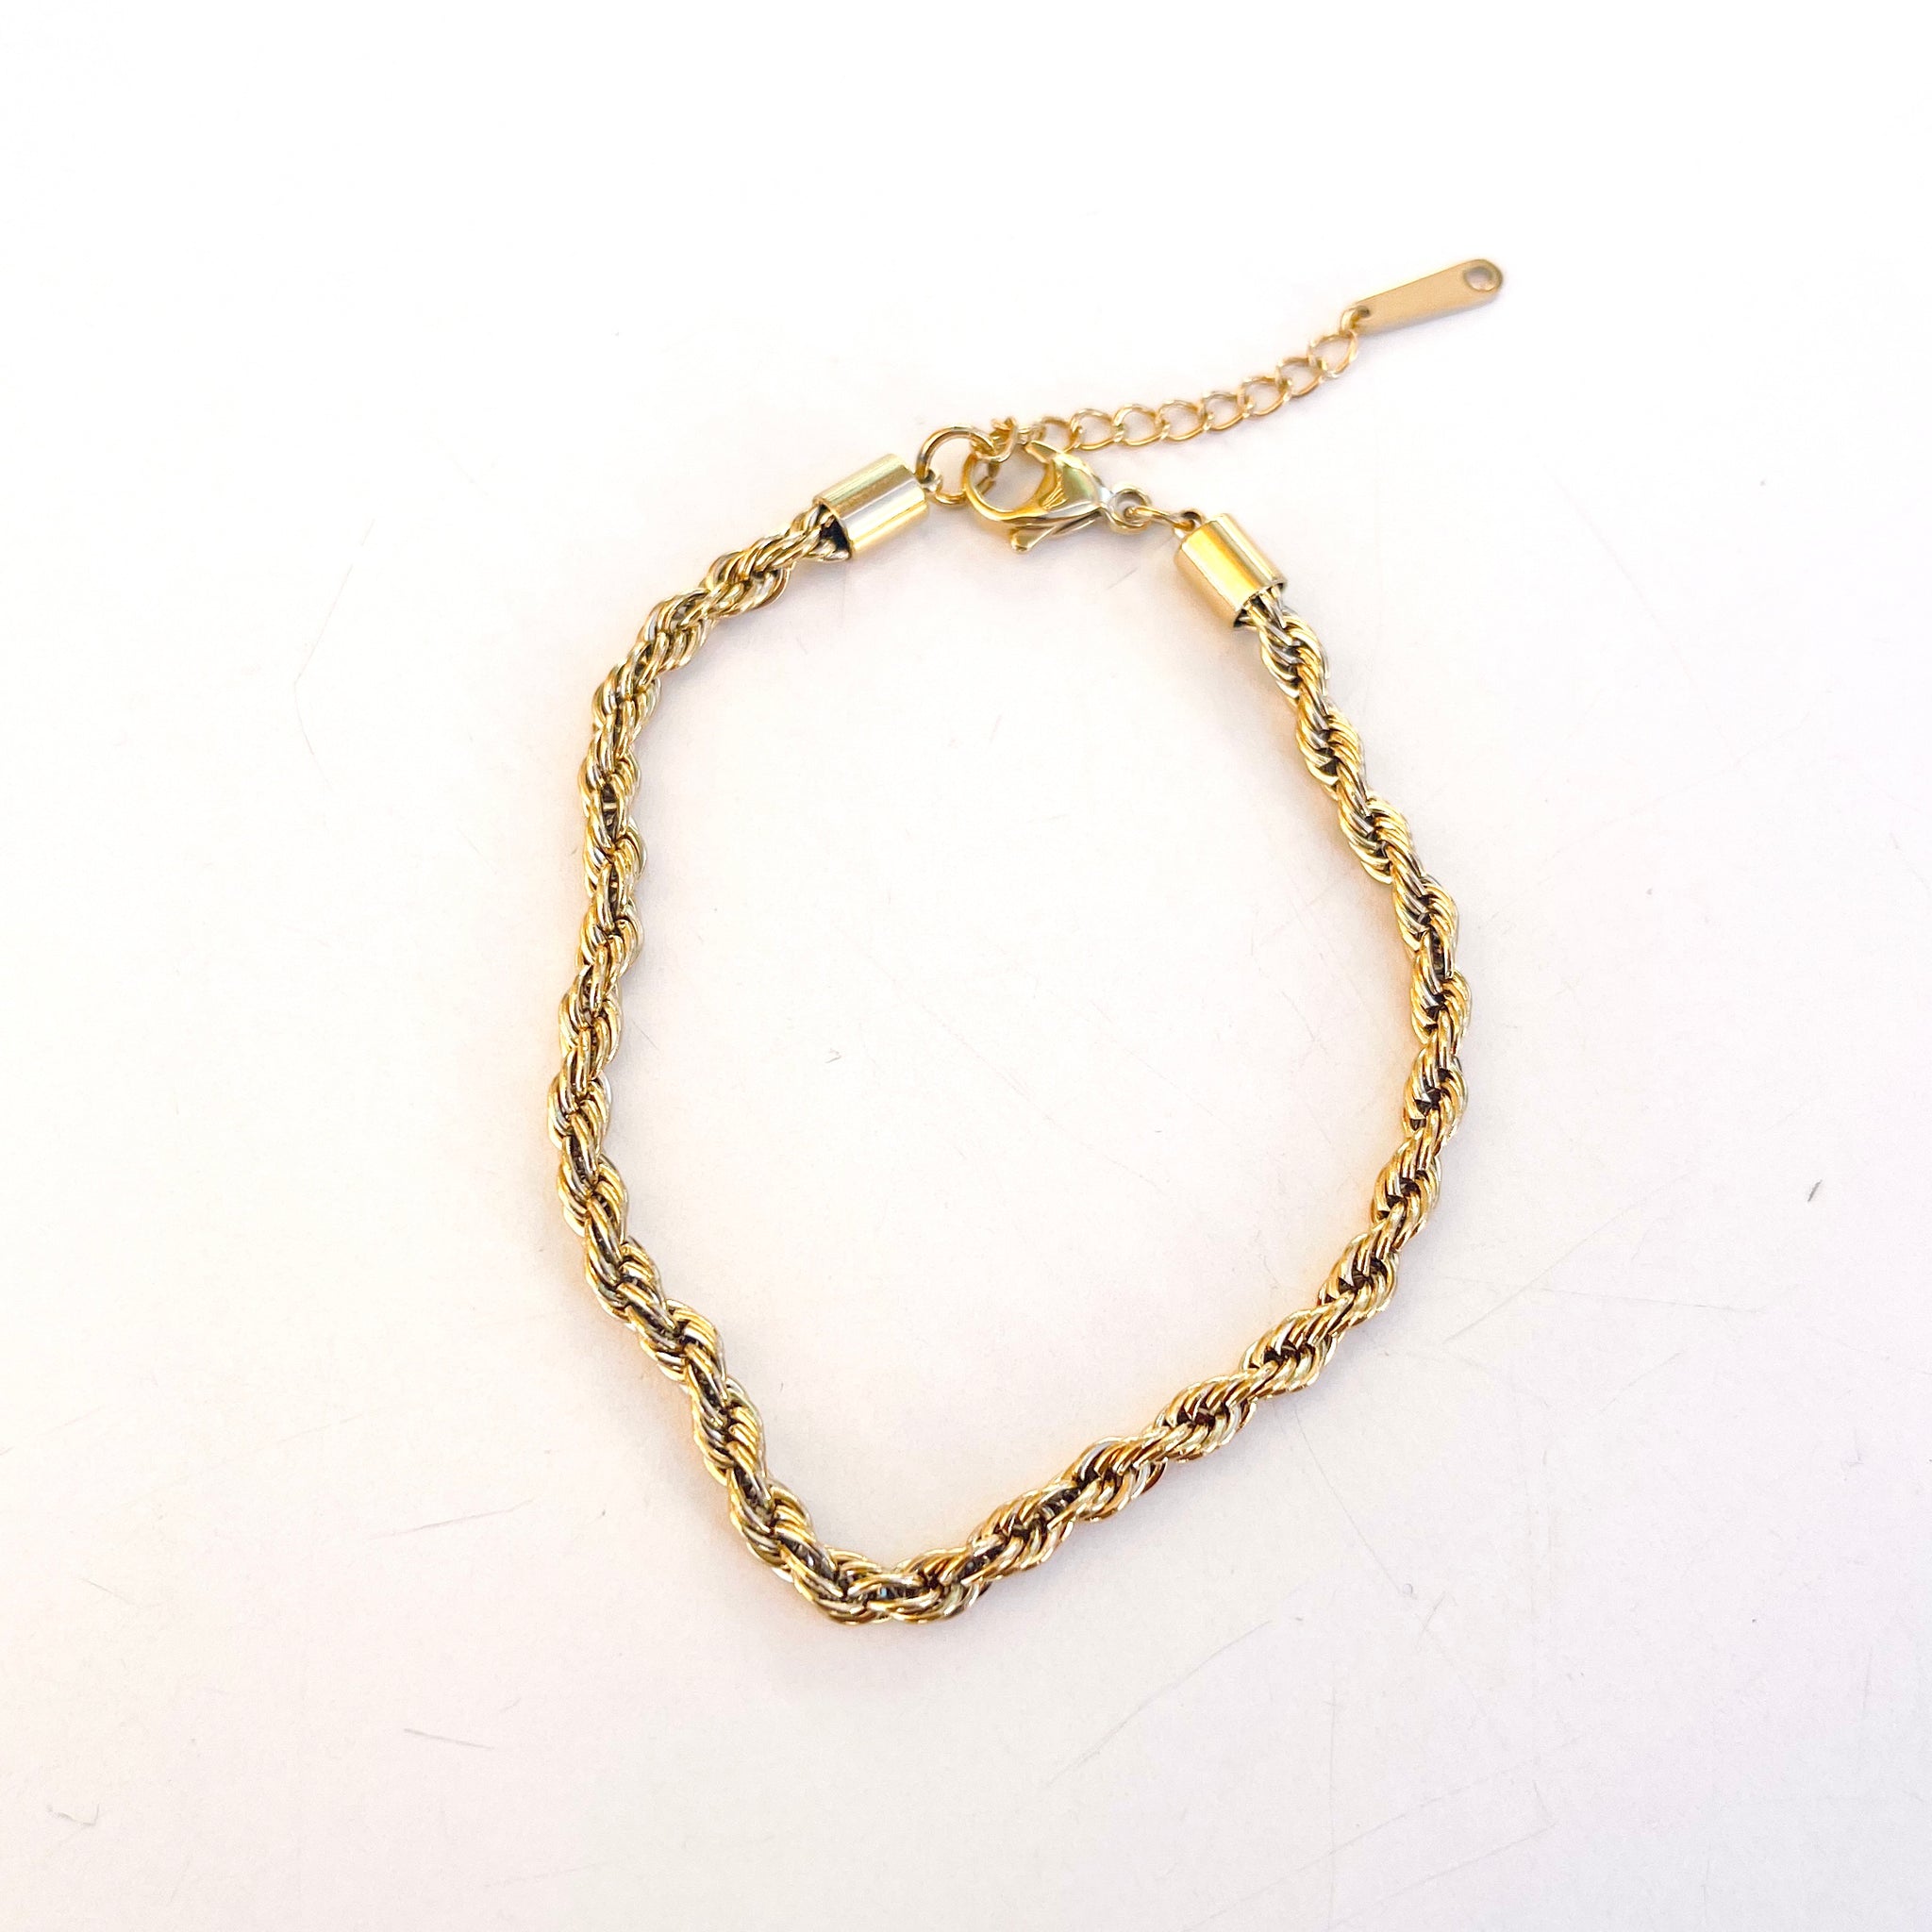 Braided Chain Anklet in Gold - Stainless Steel